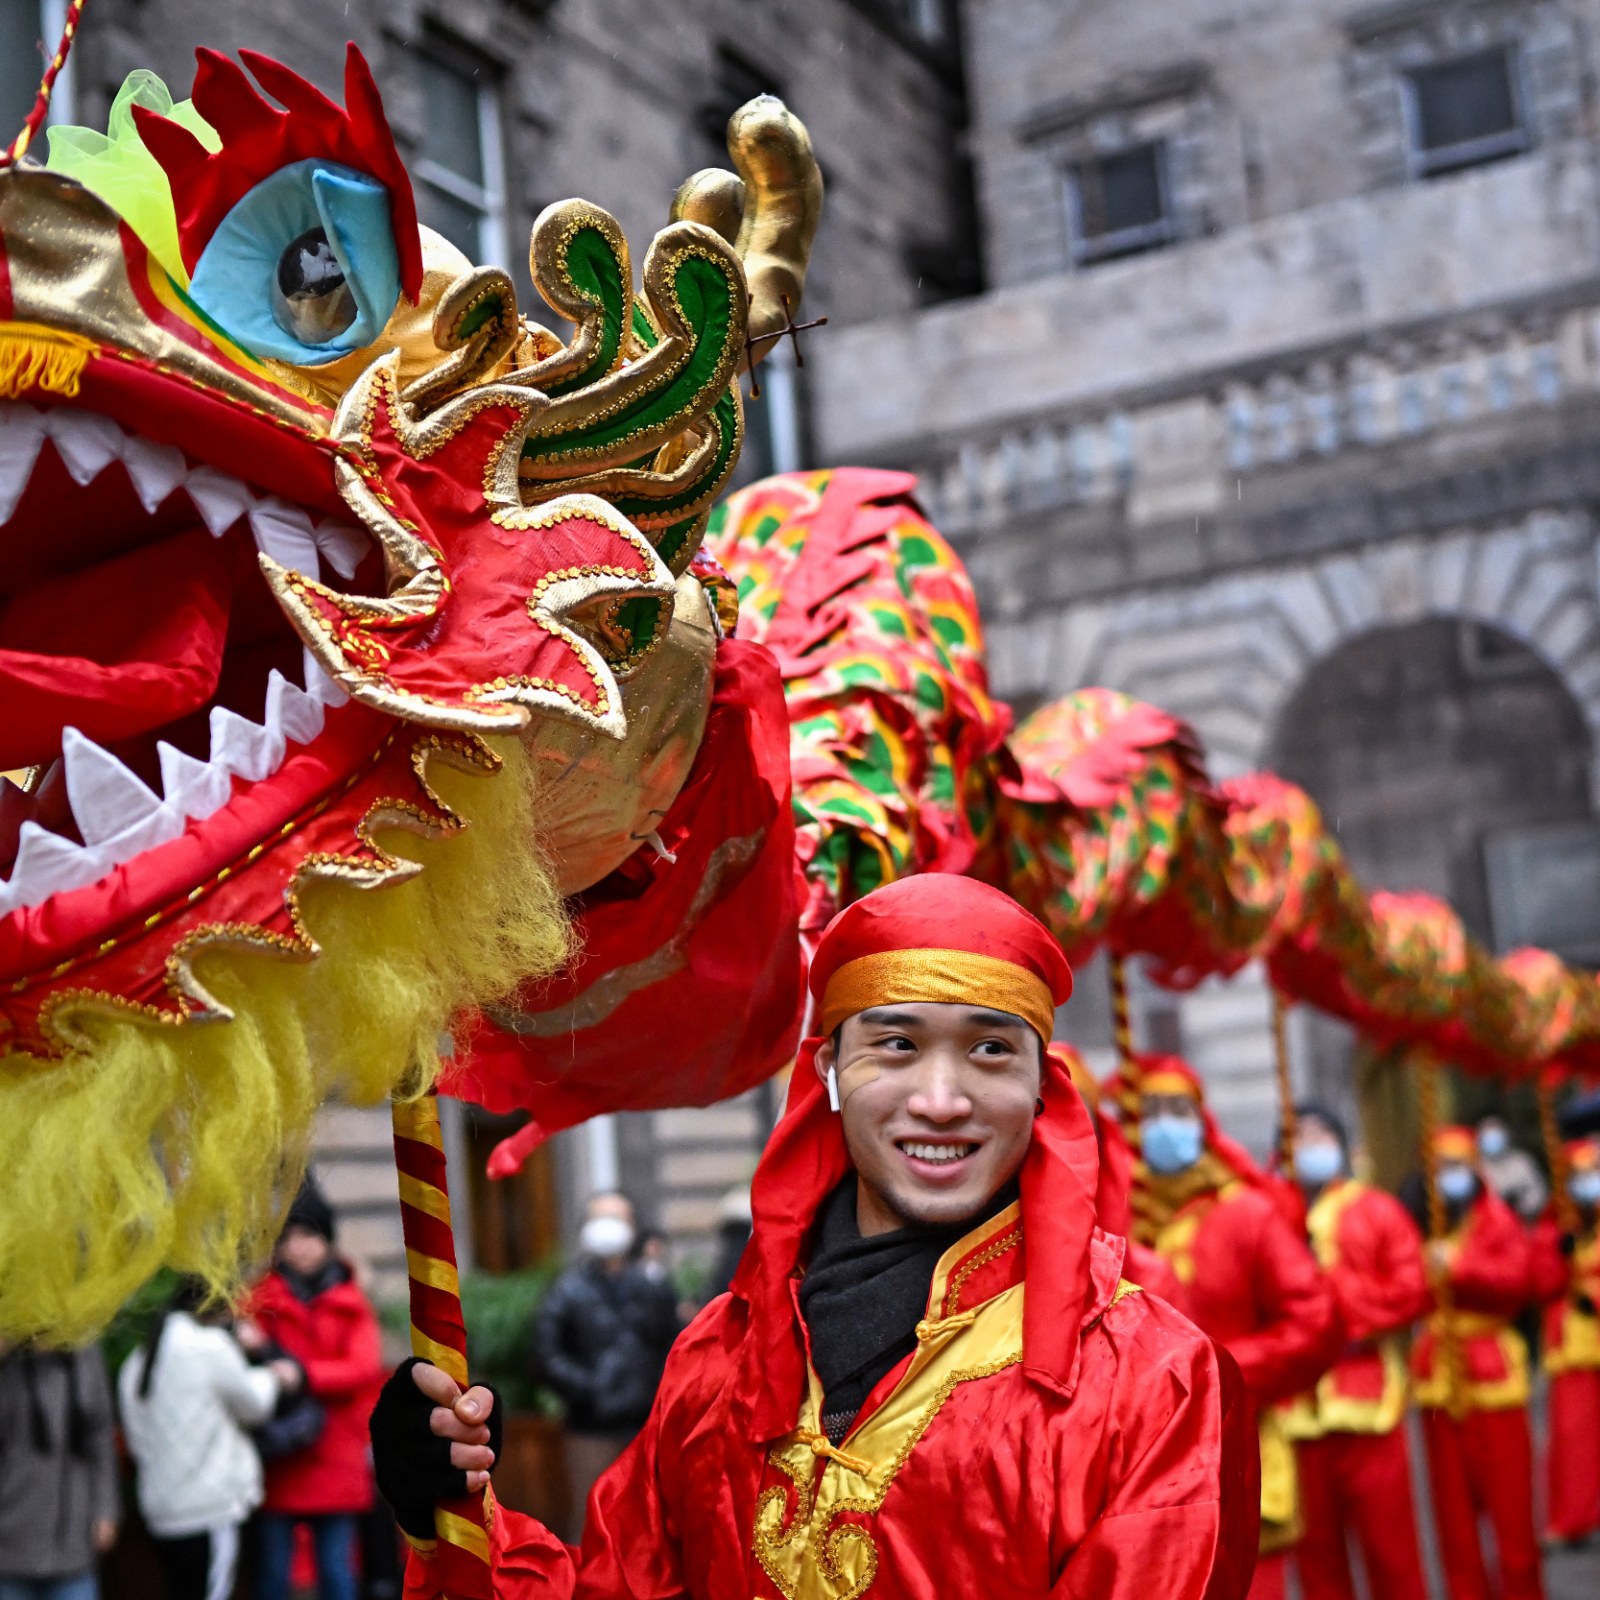 6 Weird And Wonderful Lunar New Year Traditions From Around The World